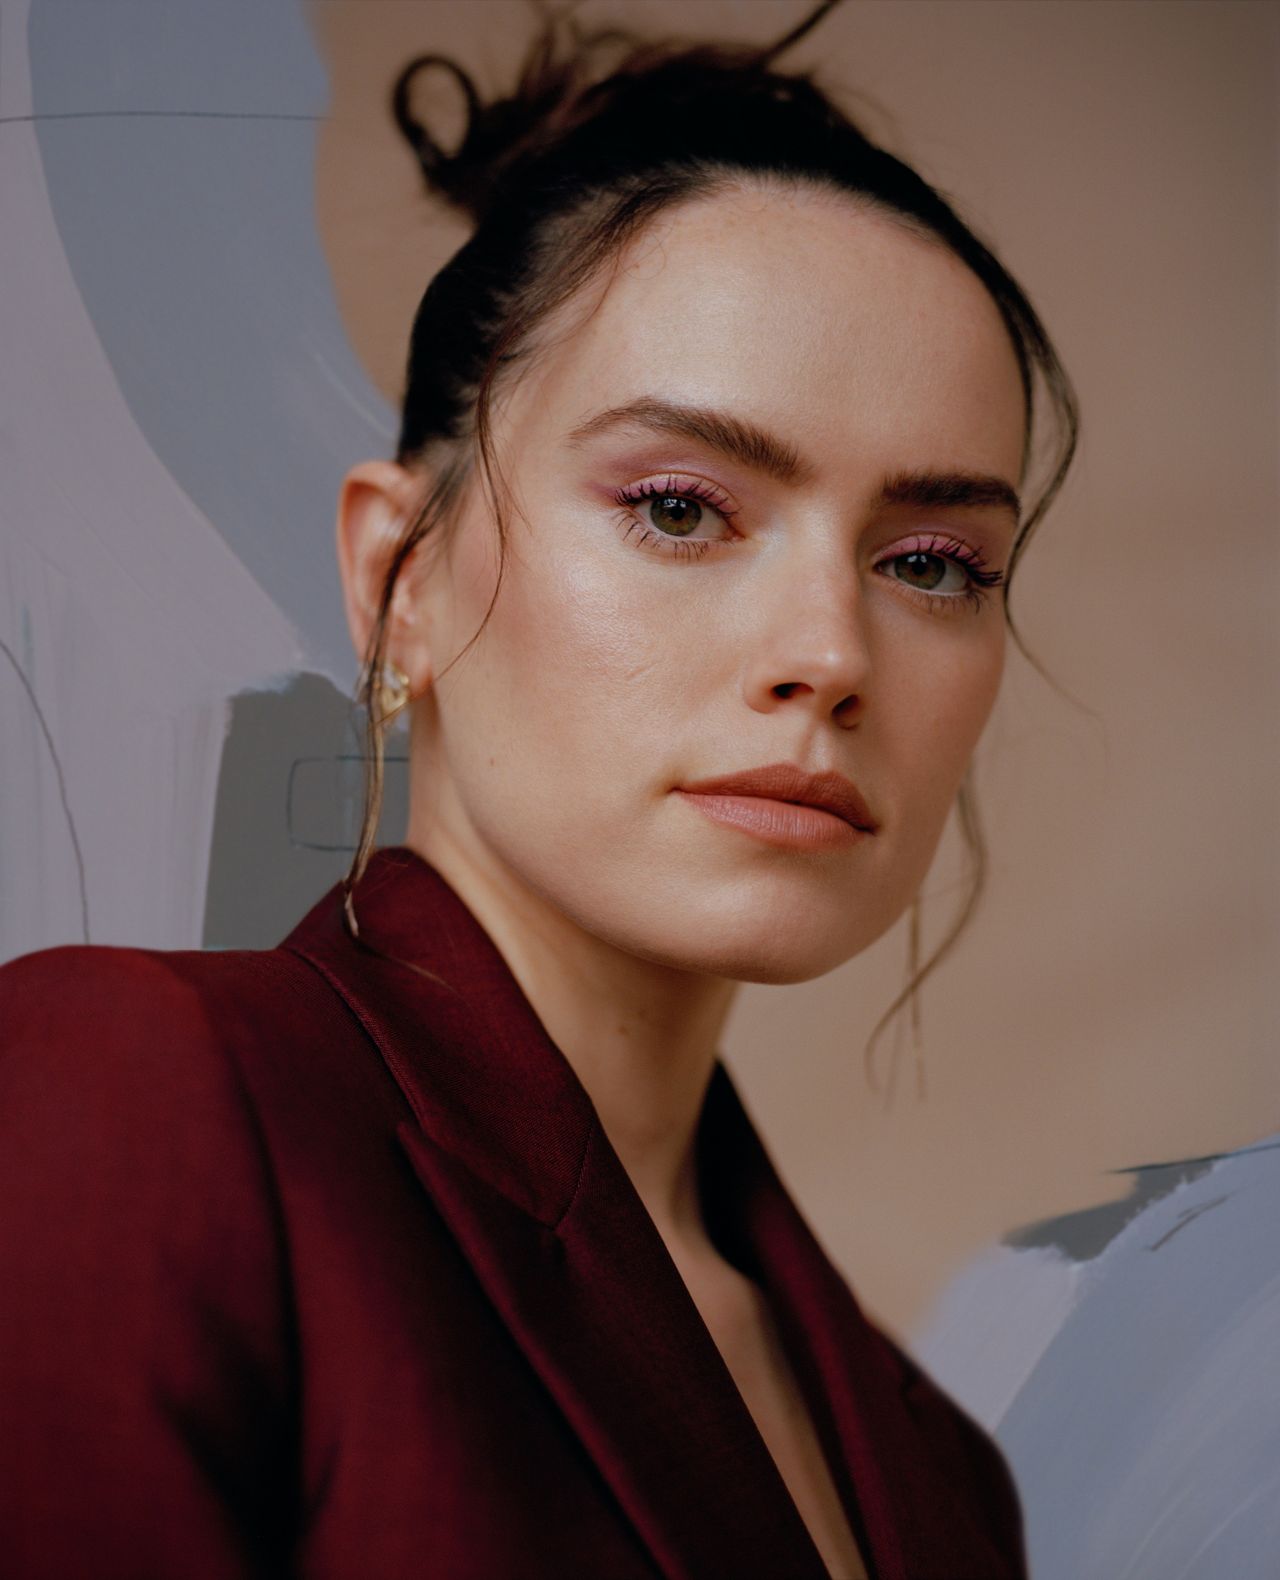 New Daisy Ridley 2021 Wallpapers